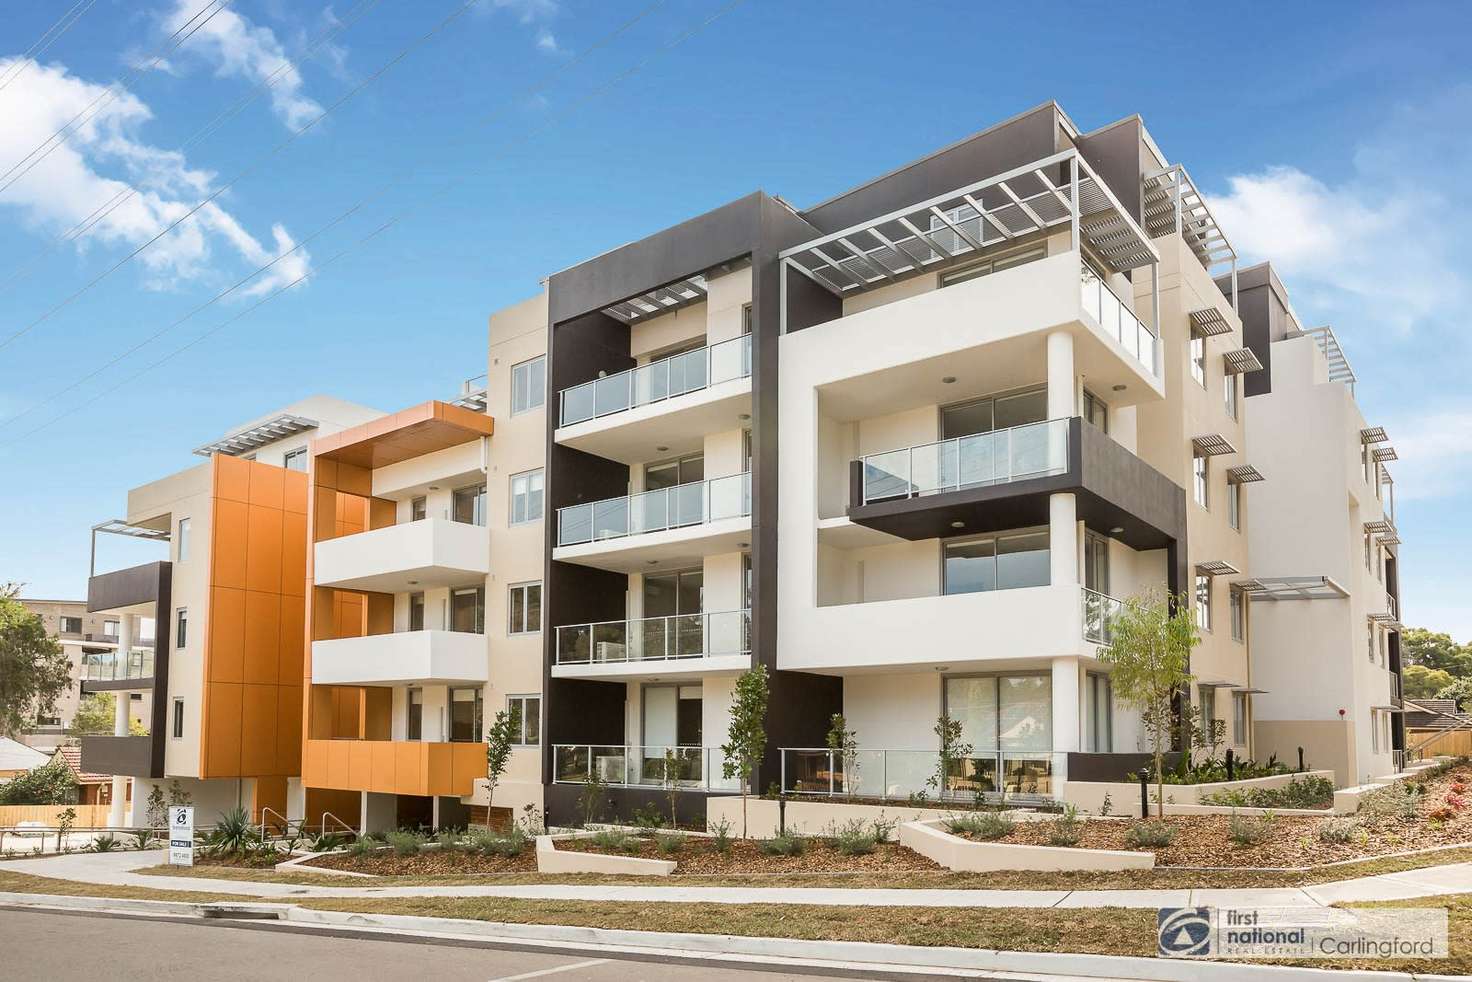 Main view of Homely apartment listing, 15/30-34 Keeler Street, Carlingford NSW 2118